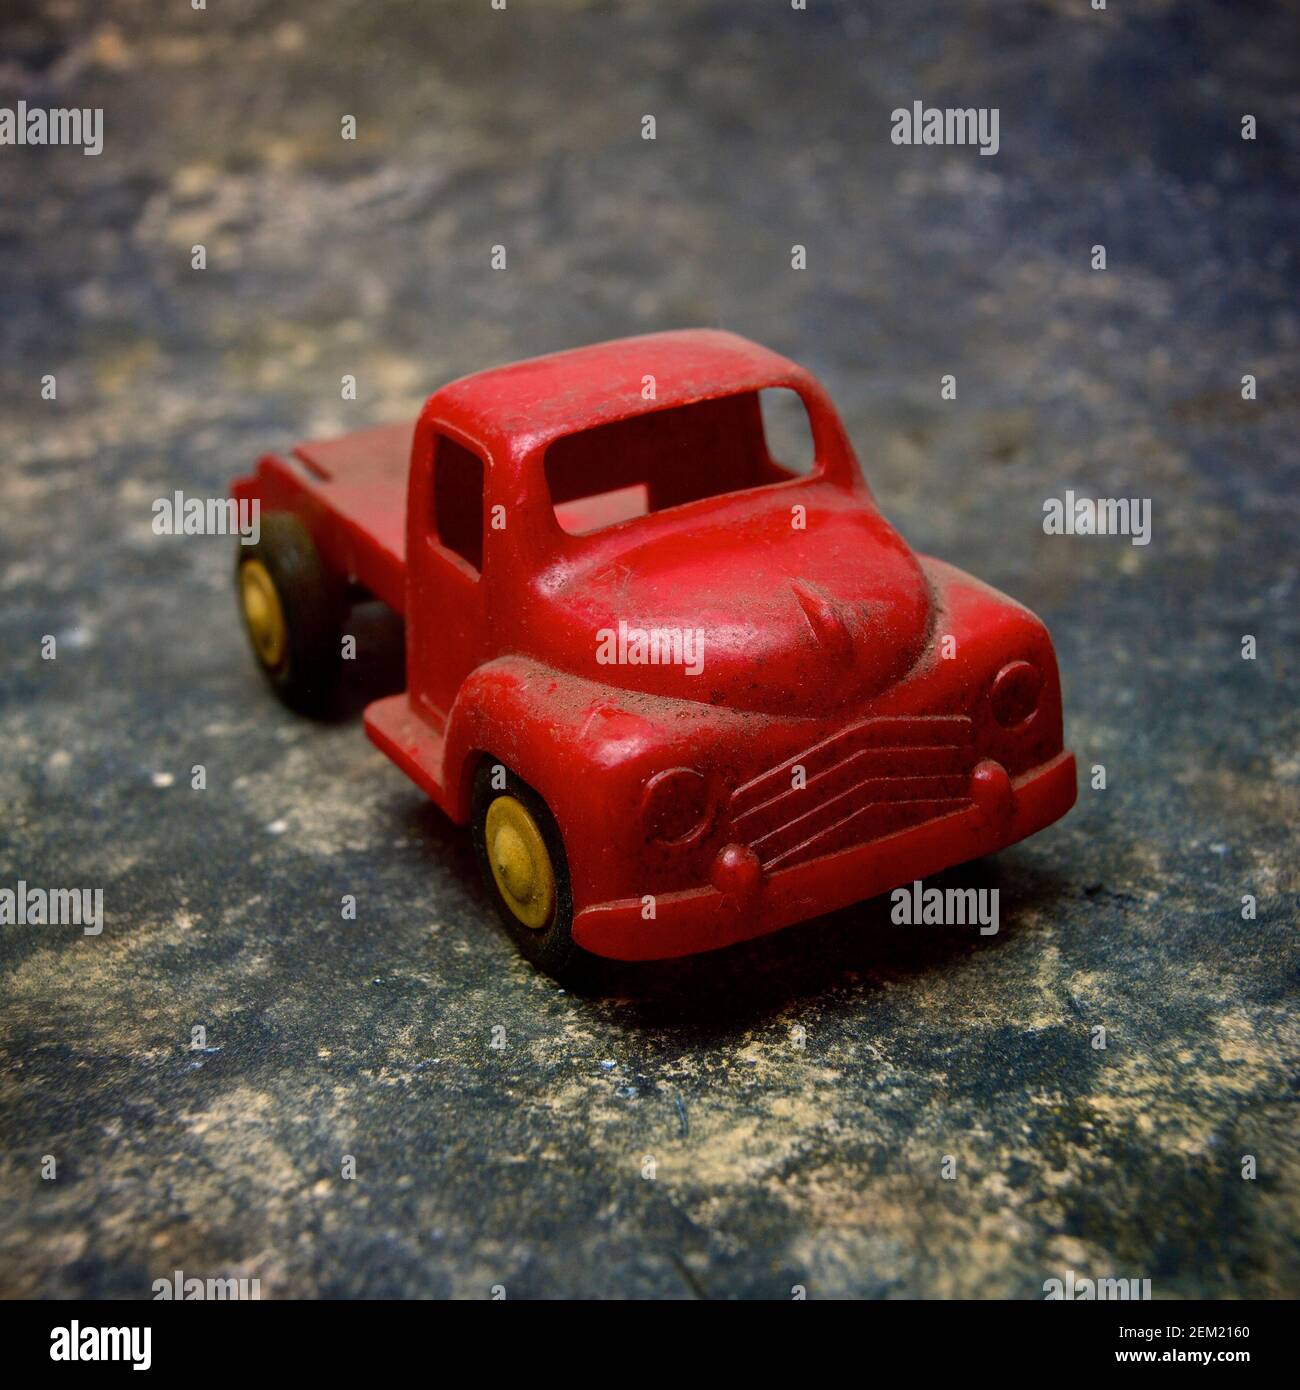 Old toy car Stock Photo